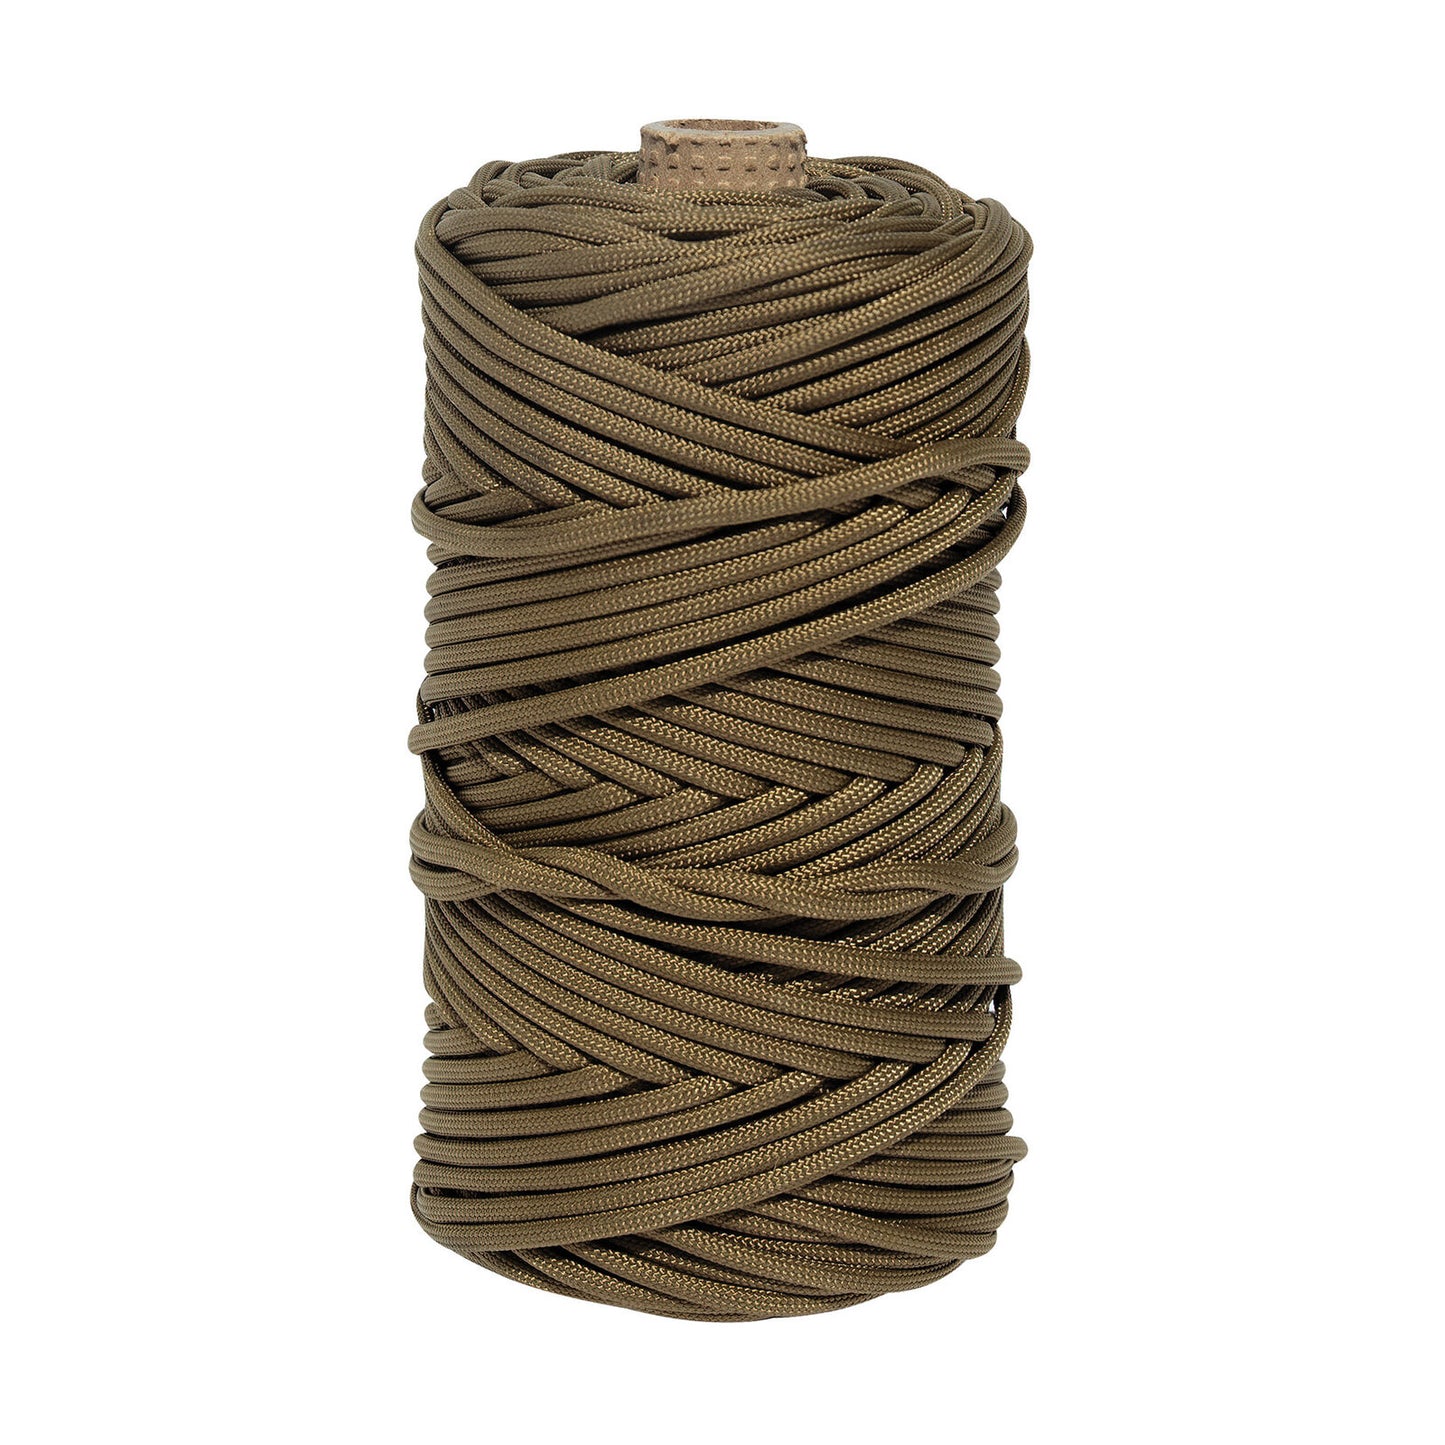 Coyote Brown 300' Paracord - Made In USA 100% Nylon 550Lb 7-Strand Core